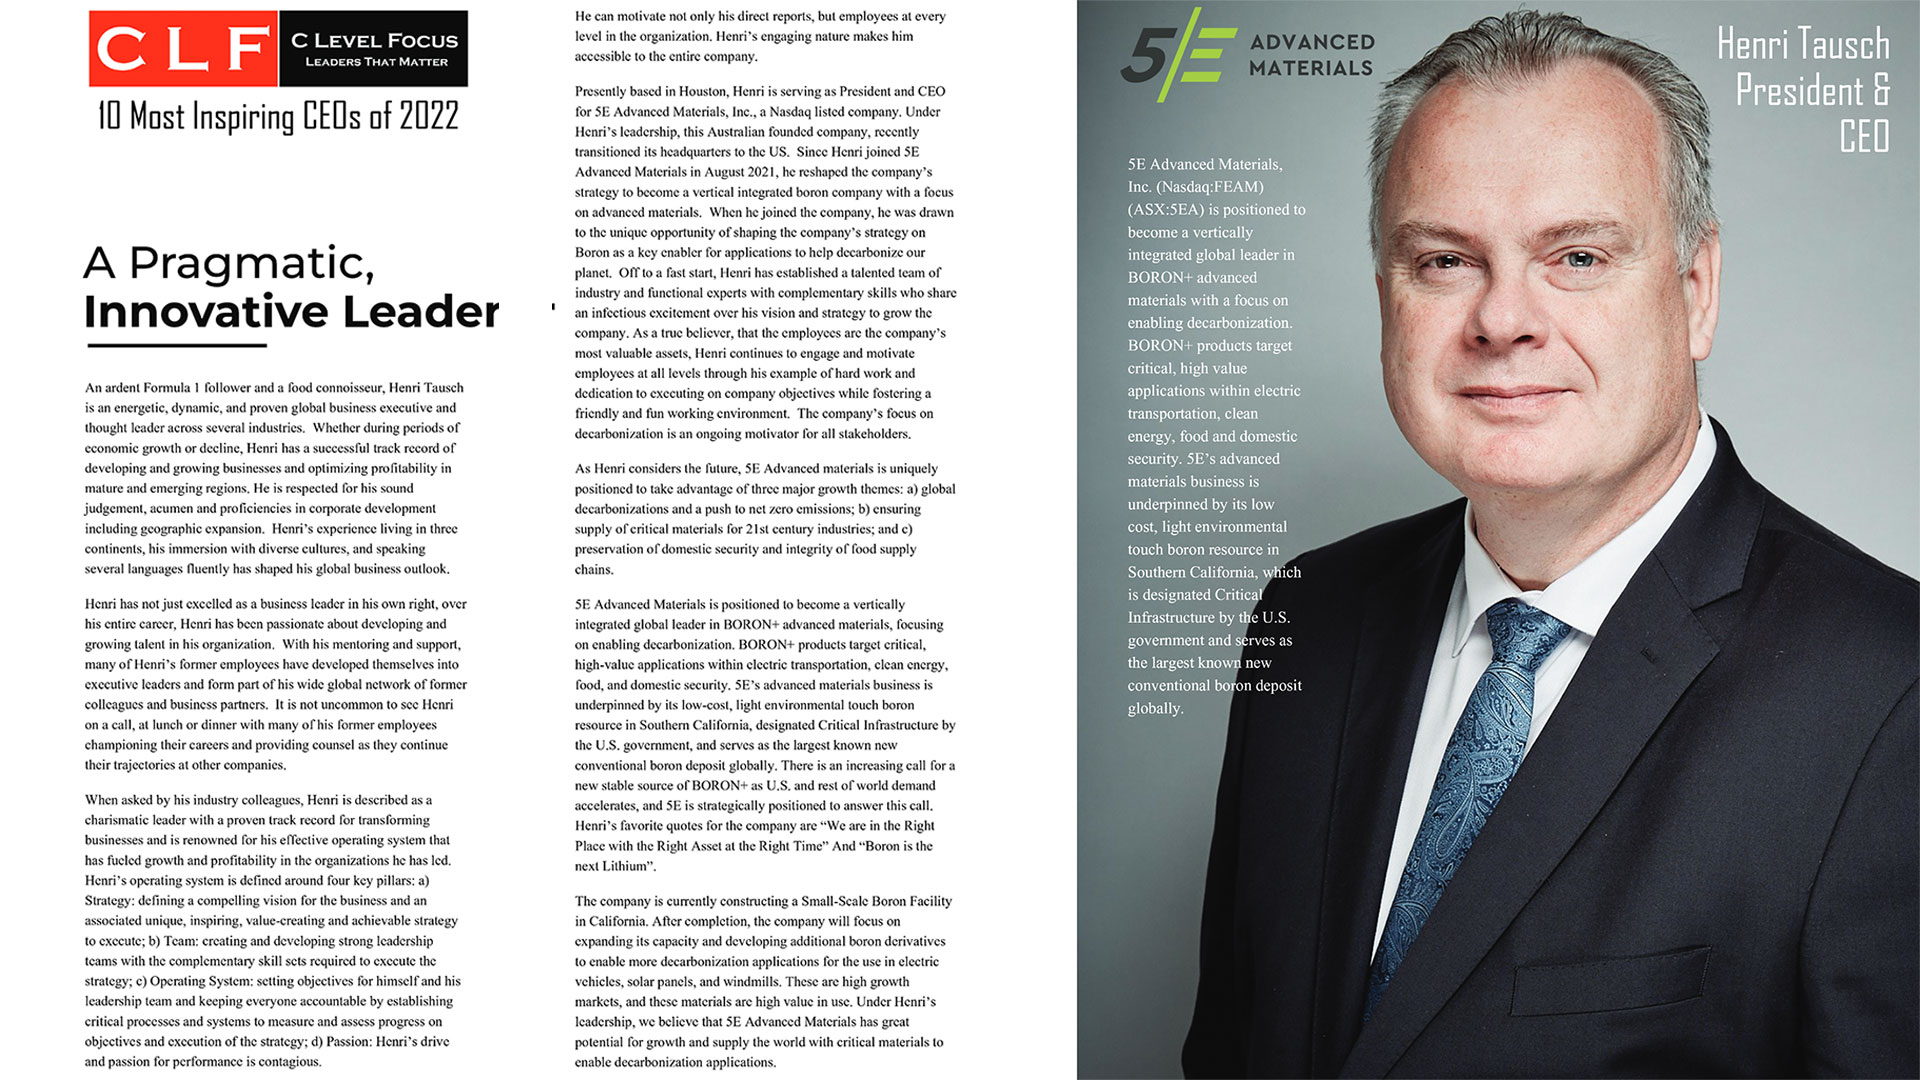 Henri Tausch, President & CEO of 5E Advanced Materials, has been Recognized as One of the 10 Most Inspiring CEOs in 2022